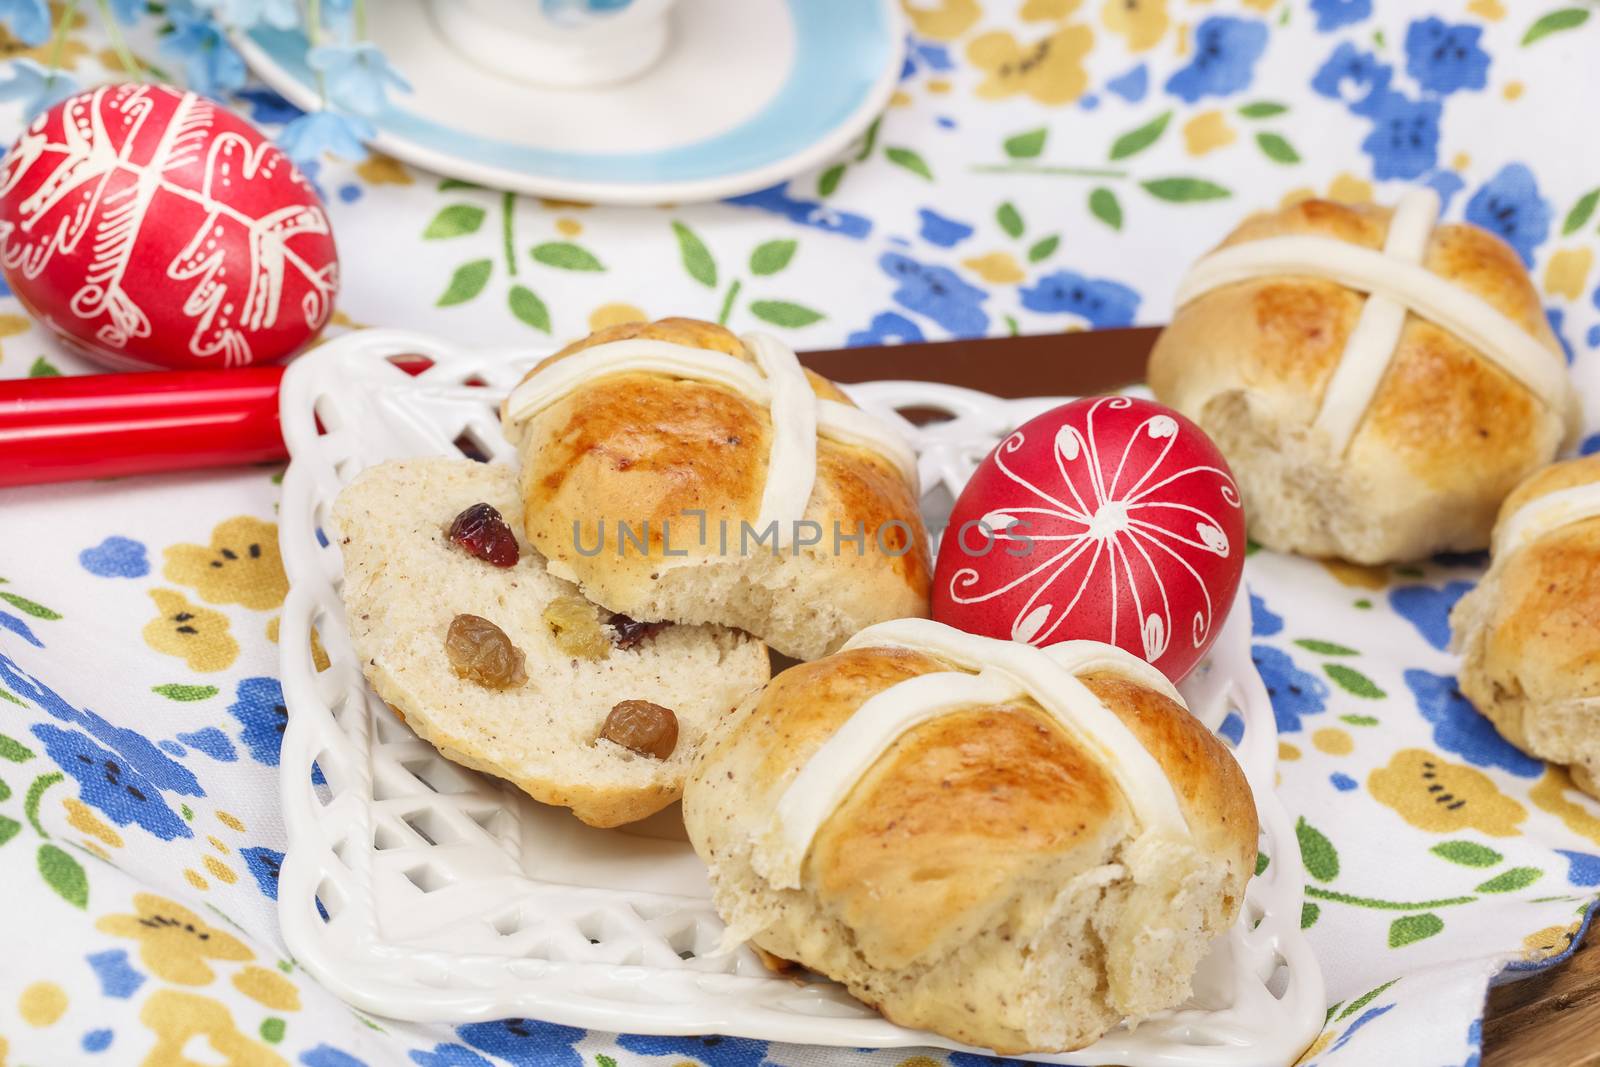 A Traditional Easter treat. Spiced, sticky glazed fruit buns with pastry crosses. Delicious warm from the oven, or lightly toasted for tea or breakfast. Macro, selective focus